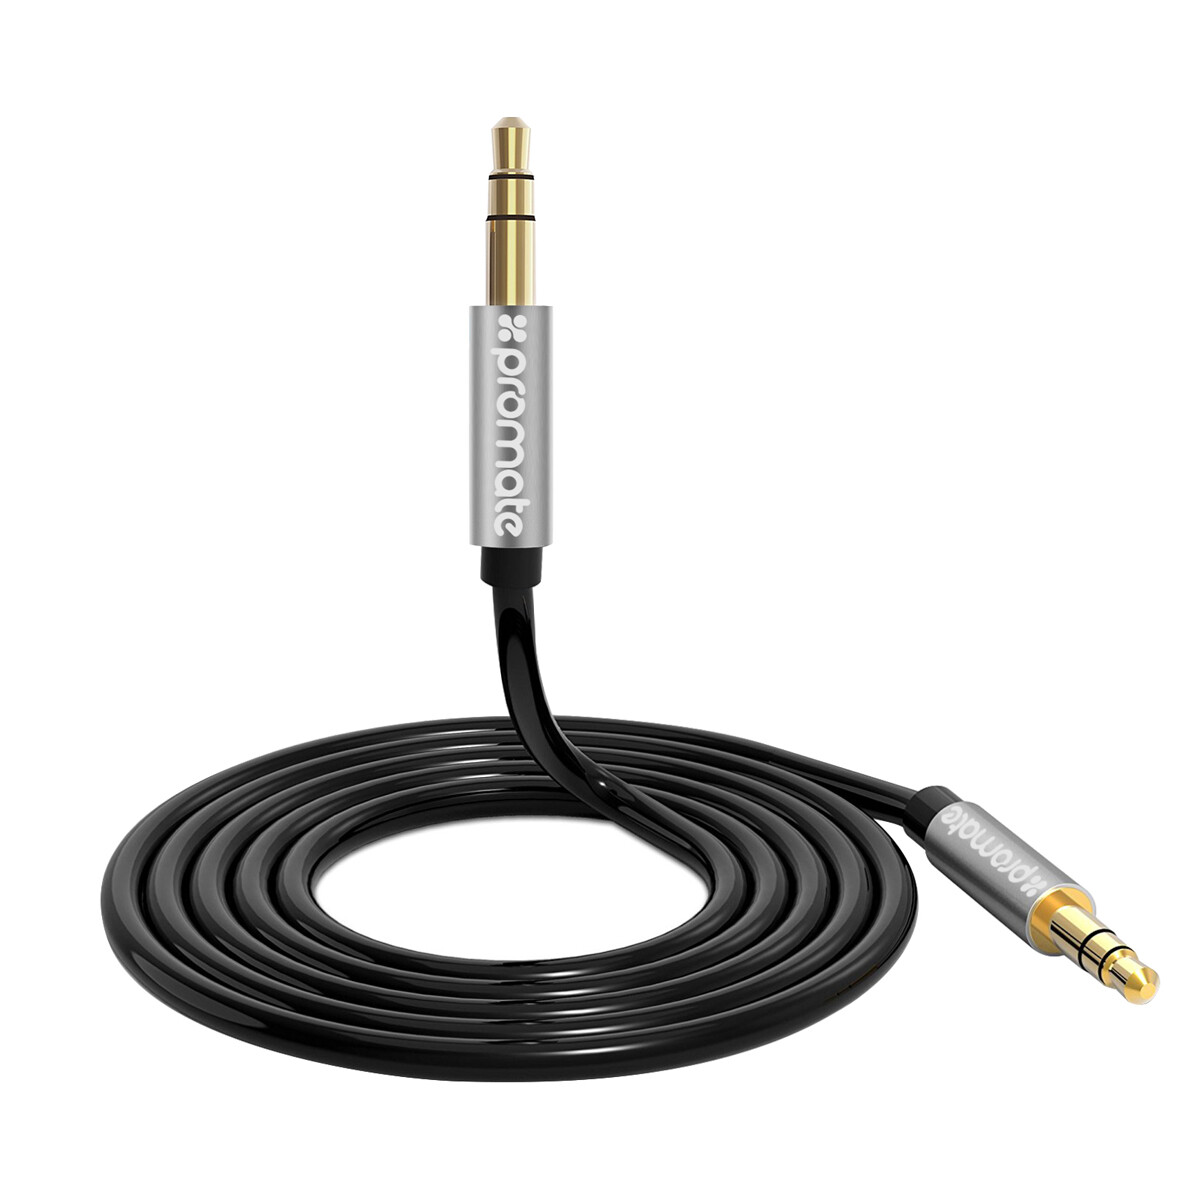 PROMATE 3-in-1 Auxiliary cable kit with 3.5mm Audio Cable, Audio Cable Spli?er and Audio Cable Extender, BLACK